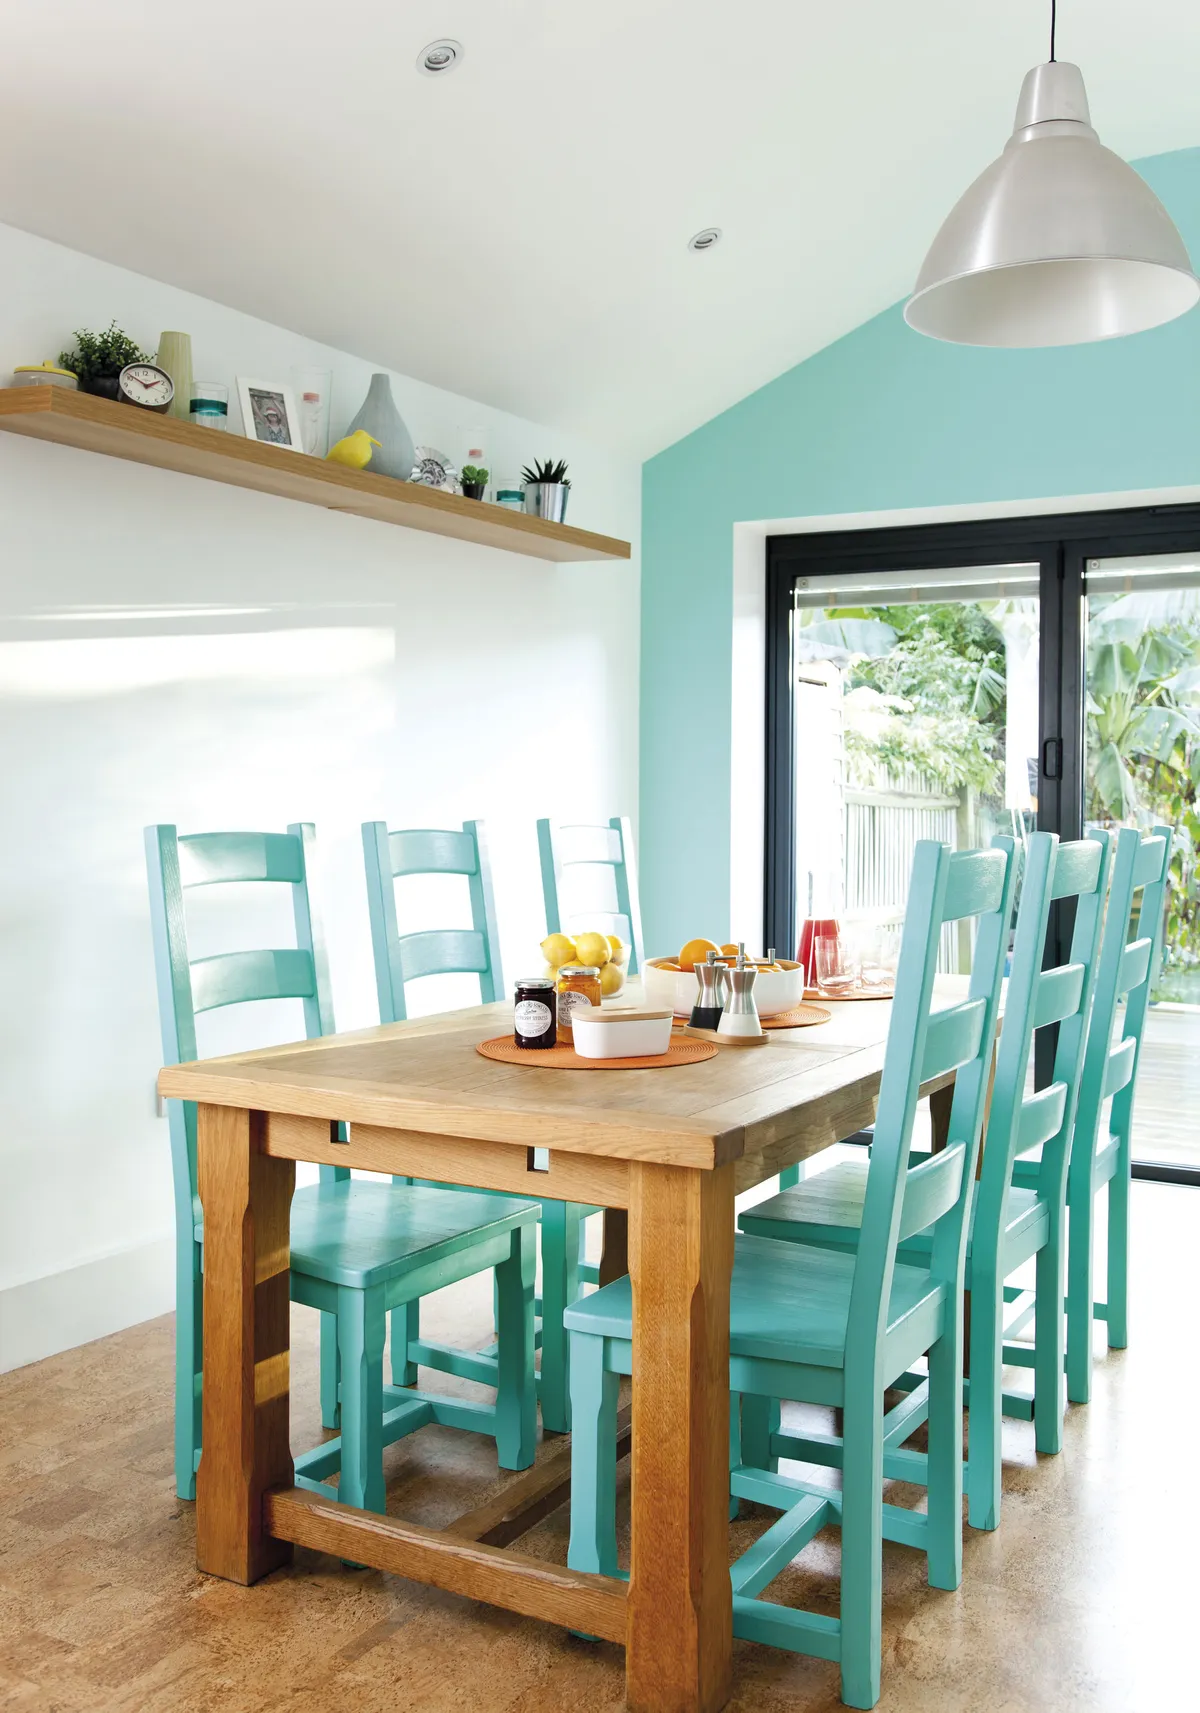 Bev’s chairs were looking tired so she painted them a fresh blue-green, which, when teamed with orange, gives the room a summery, tropical feel